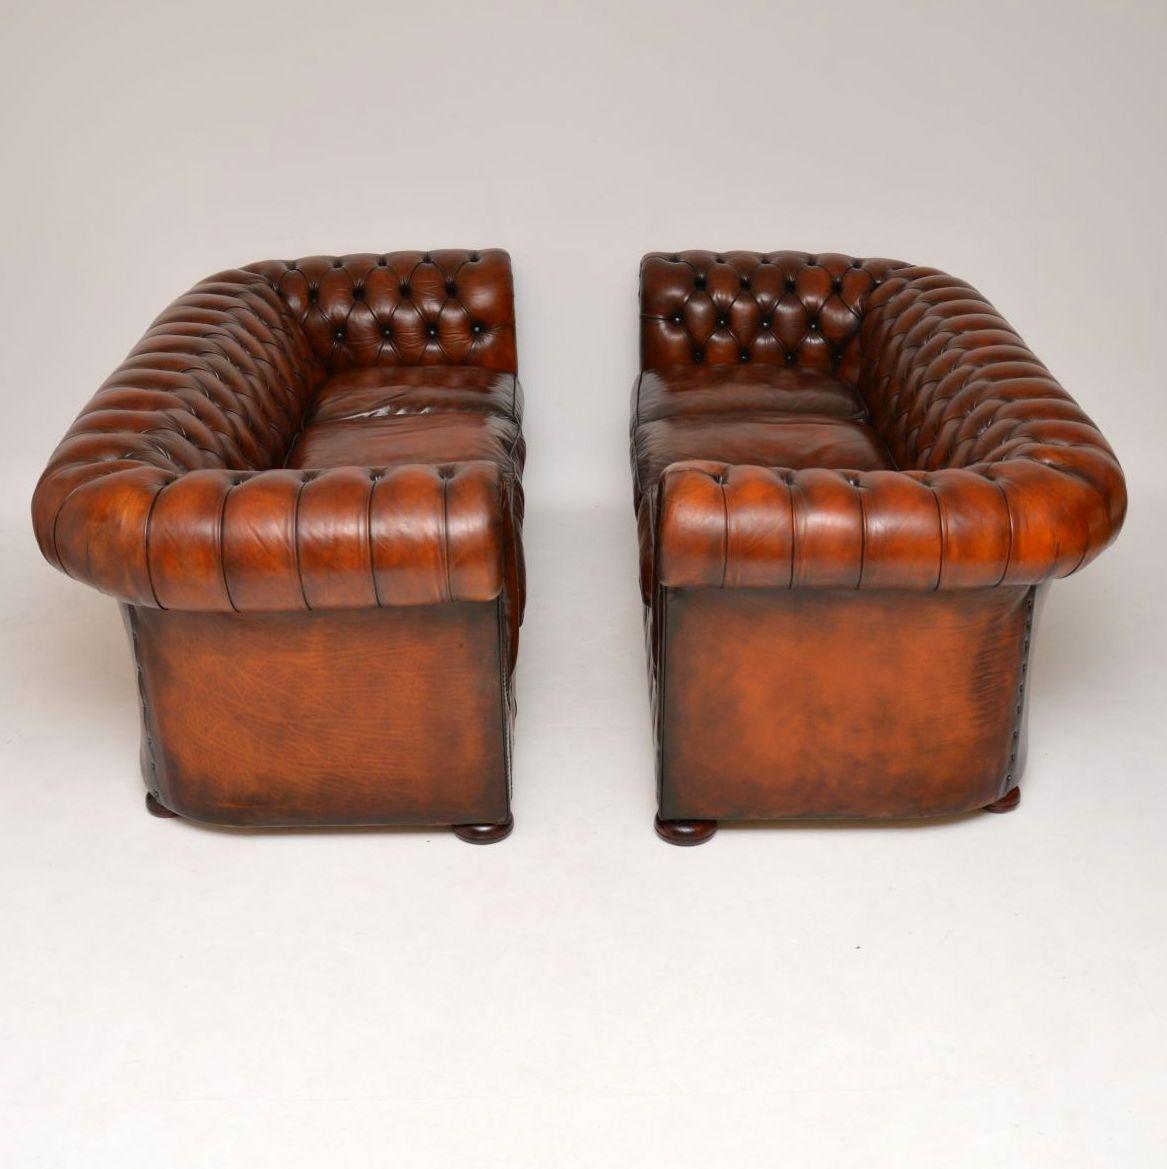 Fabulous pair of antique deep buttoned leather chesterfield three seater sofas in very good condition & dating to around the 1950s period. They are virtually identical & came out of the same residence, so they must have been bought together